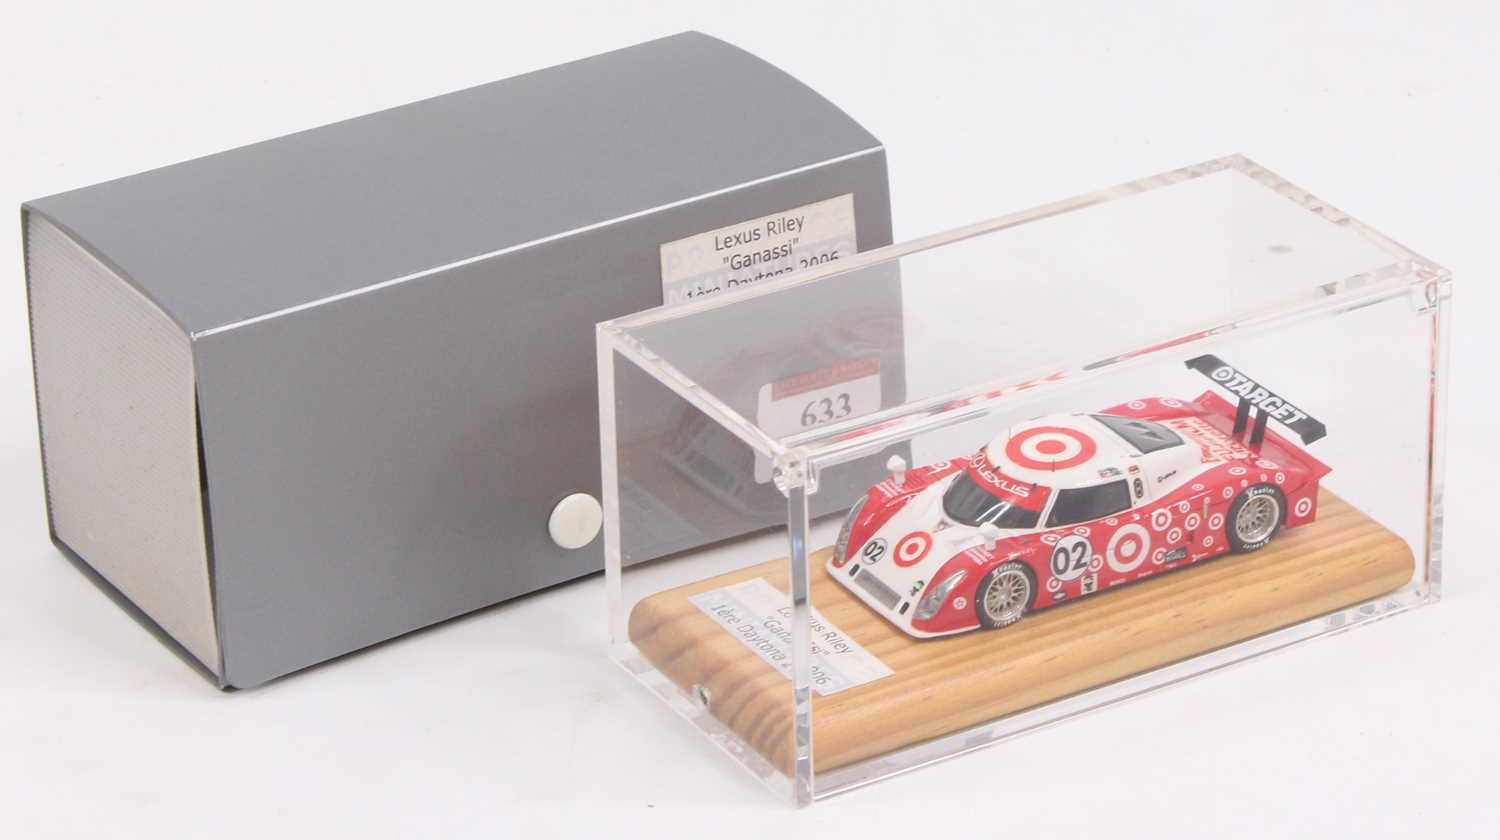 A Provence Moulage Miniatures 1/43 scale factory hand-built model of a Lexus Riley Ganassi 1st Place